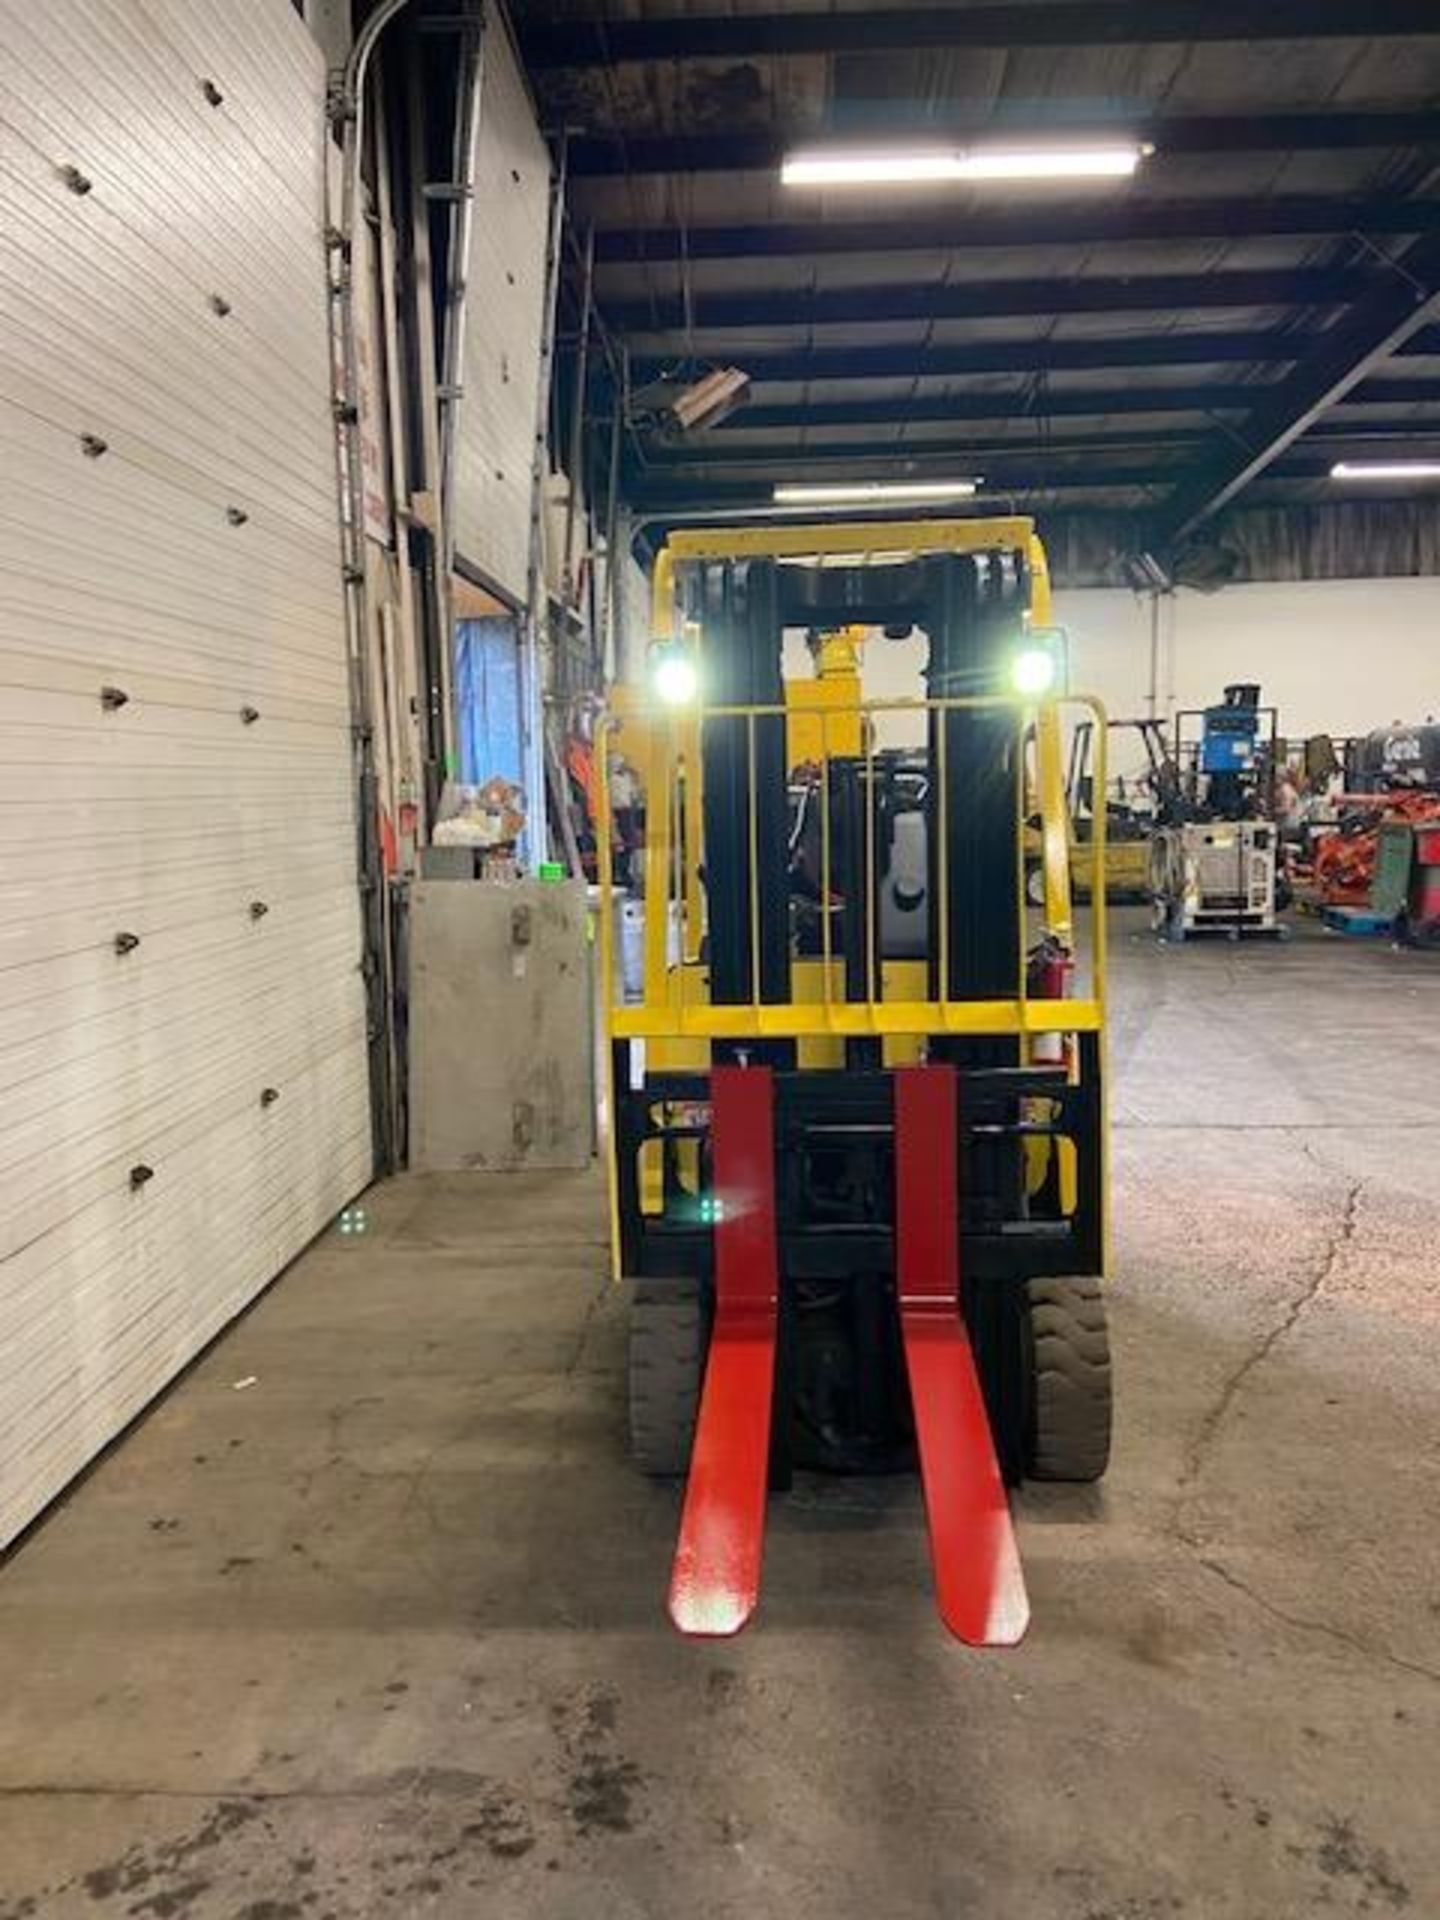 FREE CUSTOMS - 2016 Hyster 5000lbs Capacity Forklift SAFETY INTO 2021 Electric with 3-STAGE MAST - Image 2 of 3